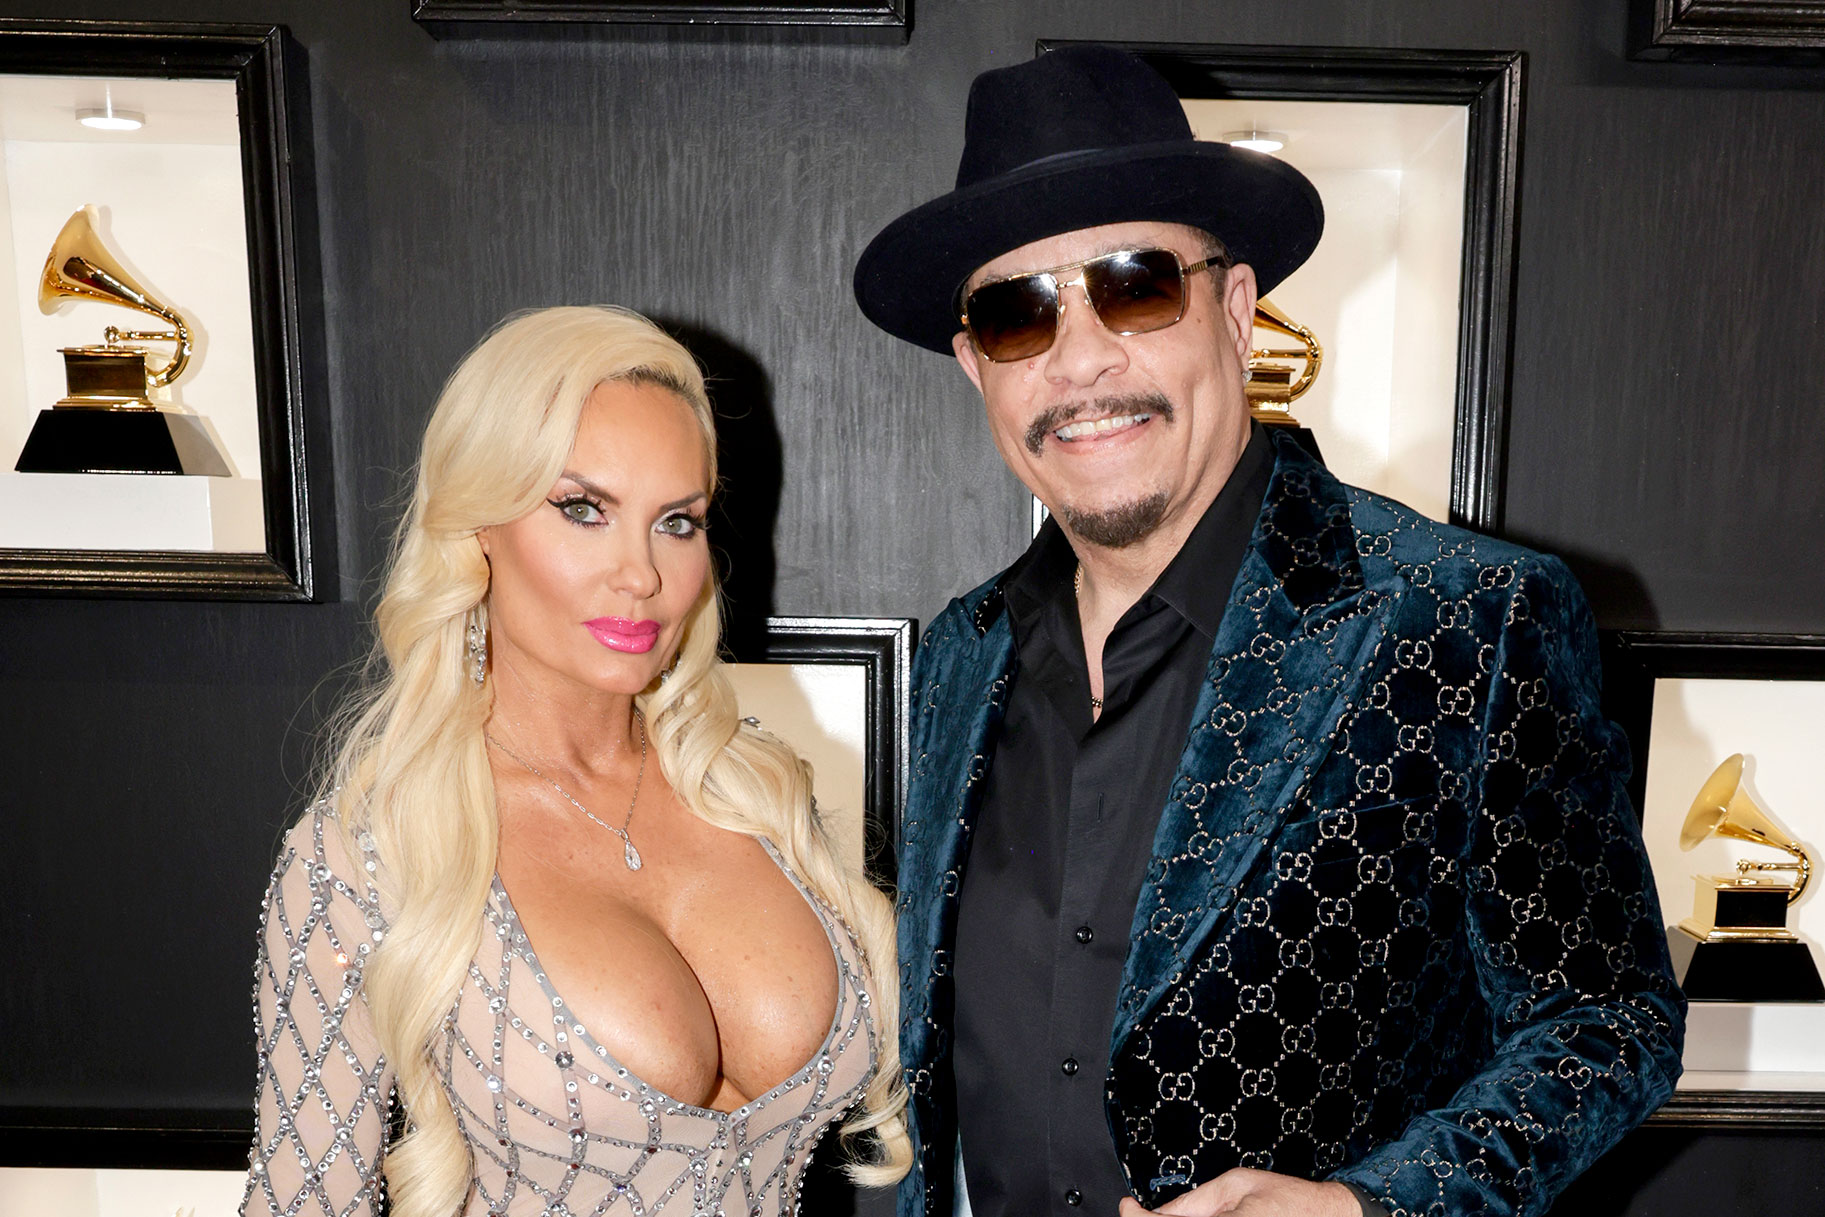 Ice T and Coco attend Grammys 2023